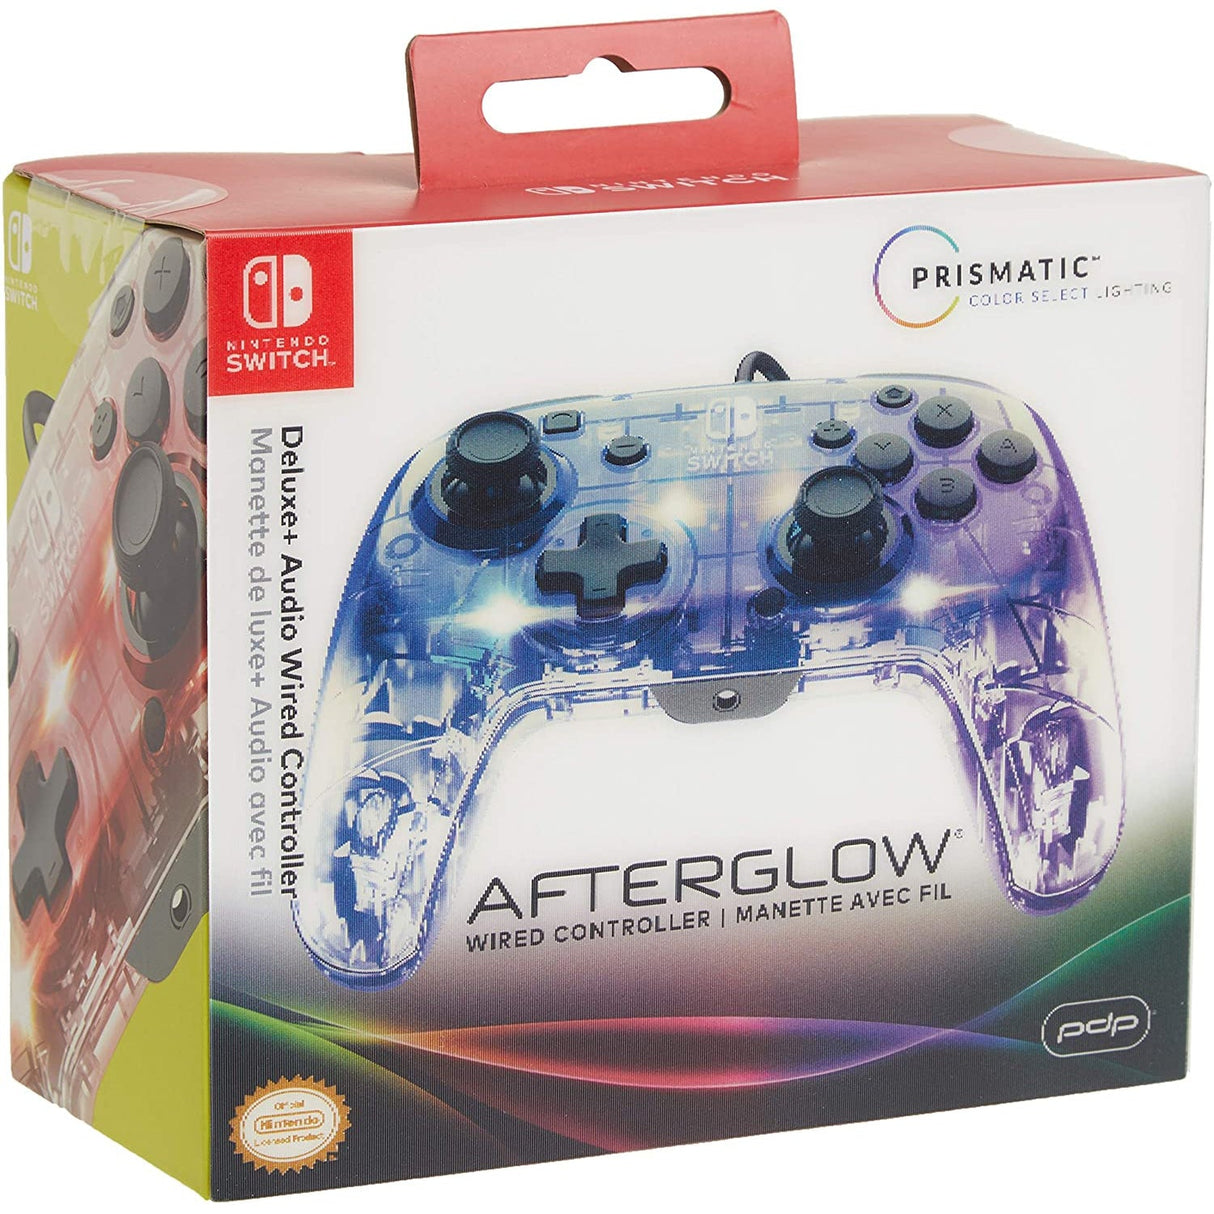 PDP Nintendo Switch Afterglow Deluxe Prismatic Wired Controller - New